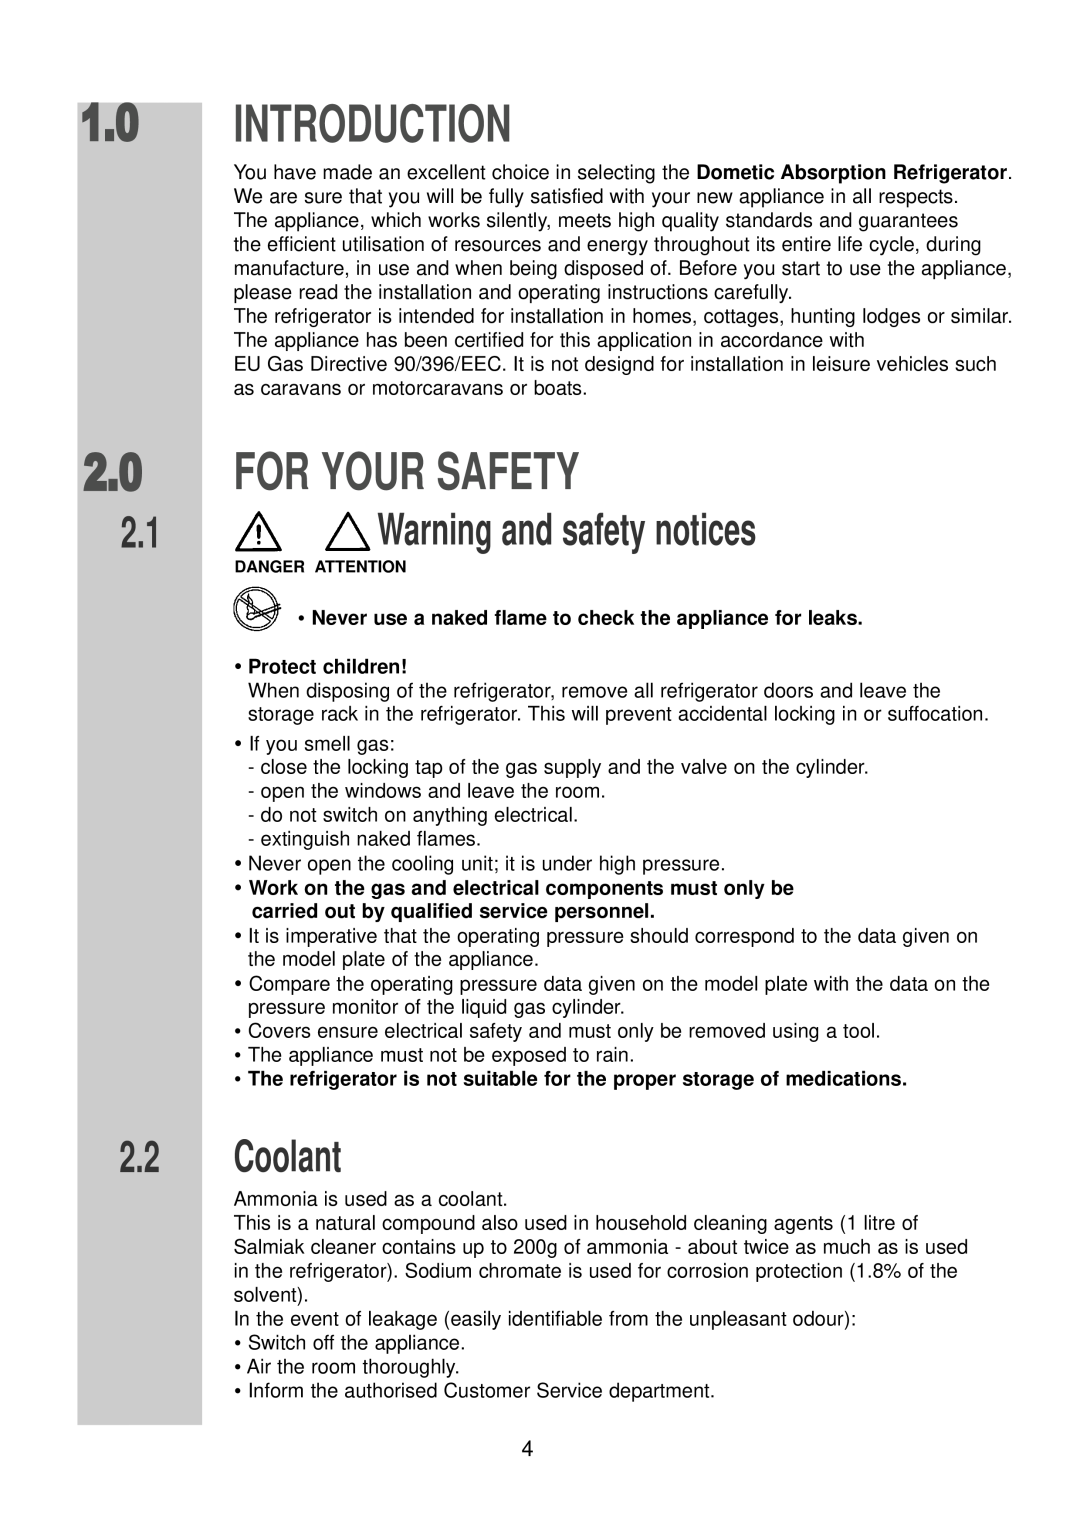 Dometic RGE 2000 installation instructions Introduction, For Your Safety, Coolant, Warning and safety notices 